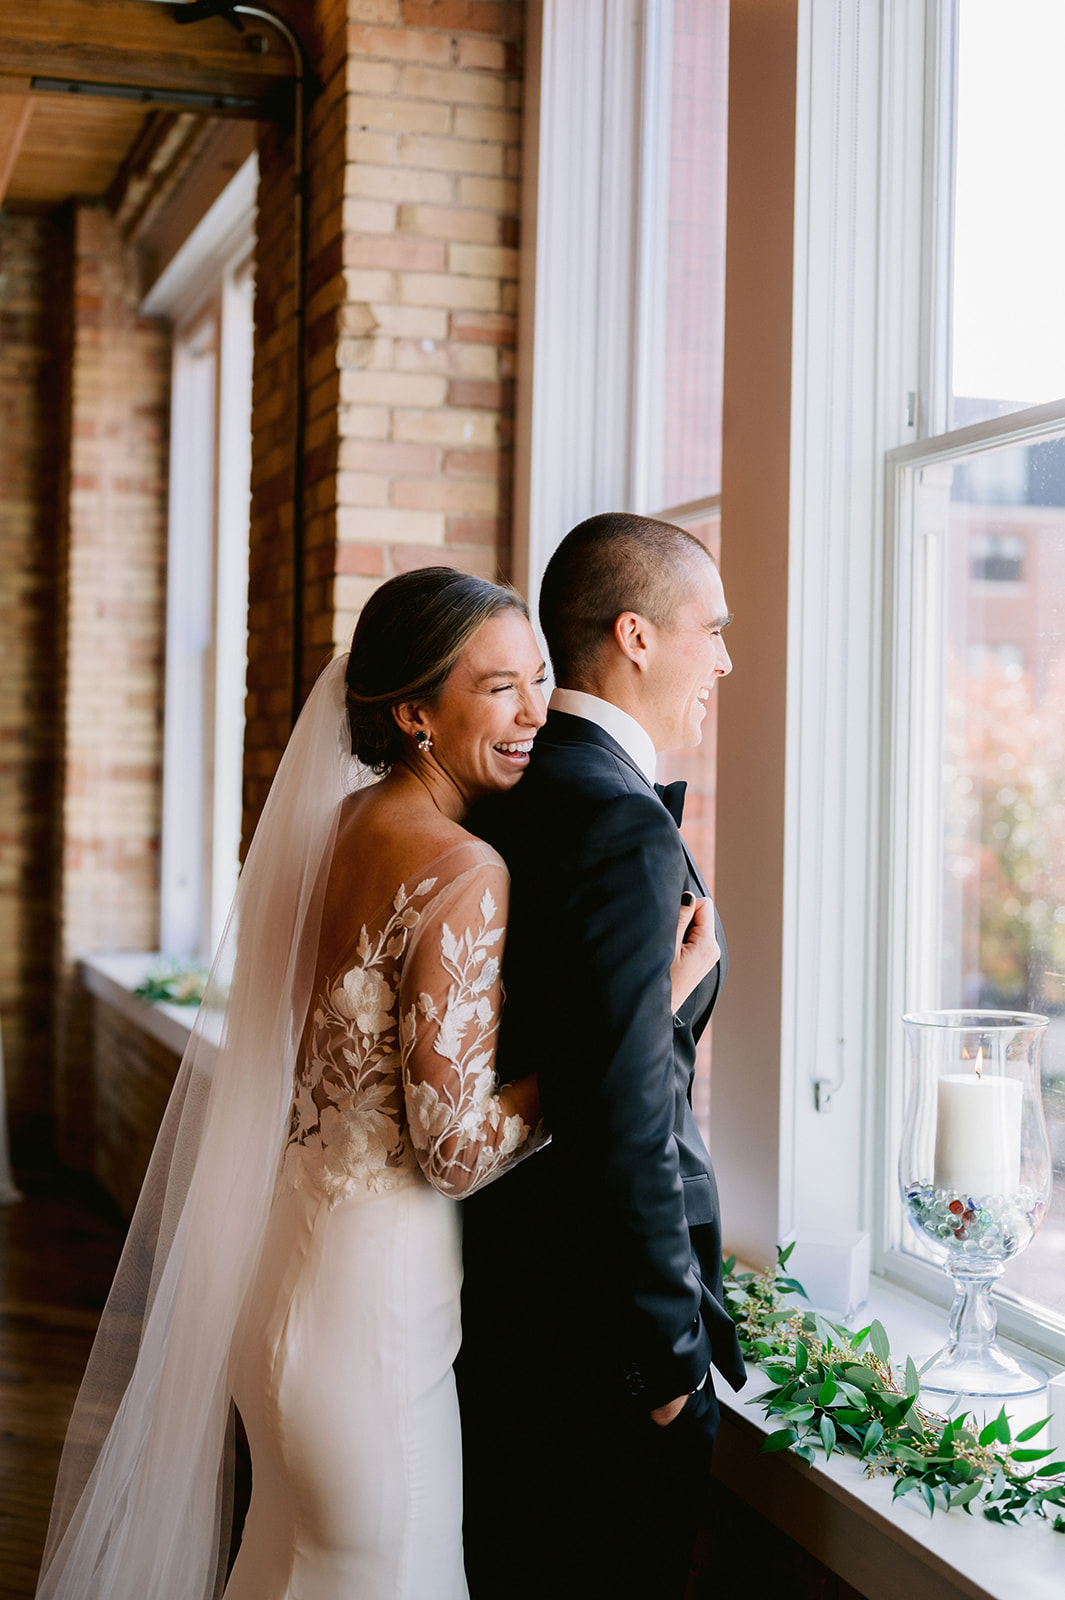 Bride smiles as she hugs groom from behind as he looks out the window, captured by Mary Shelton Media